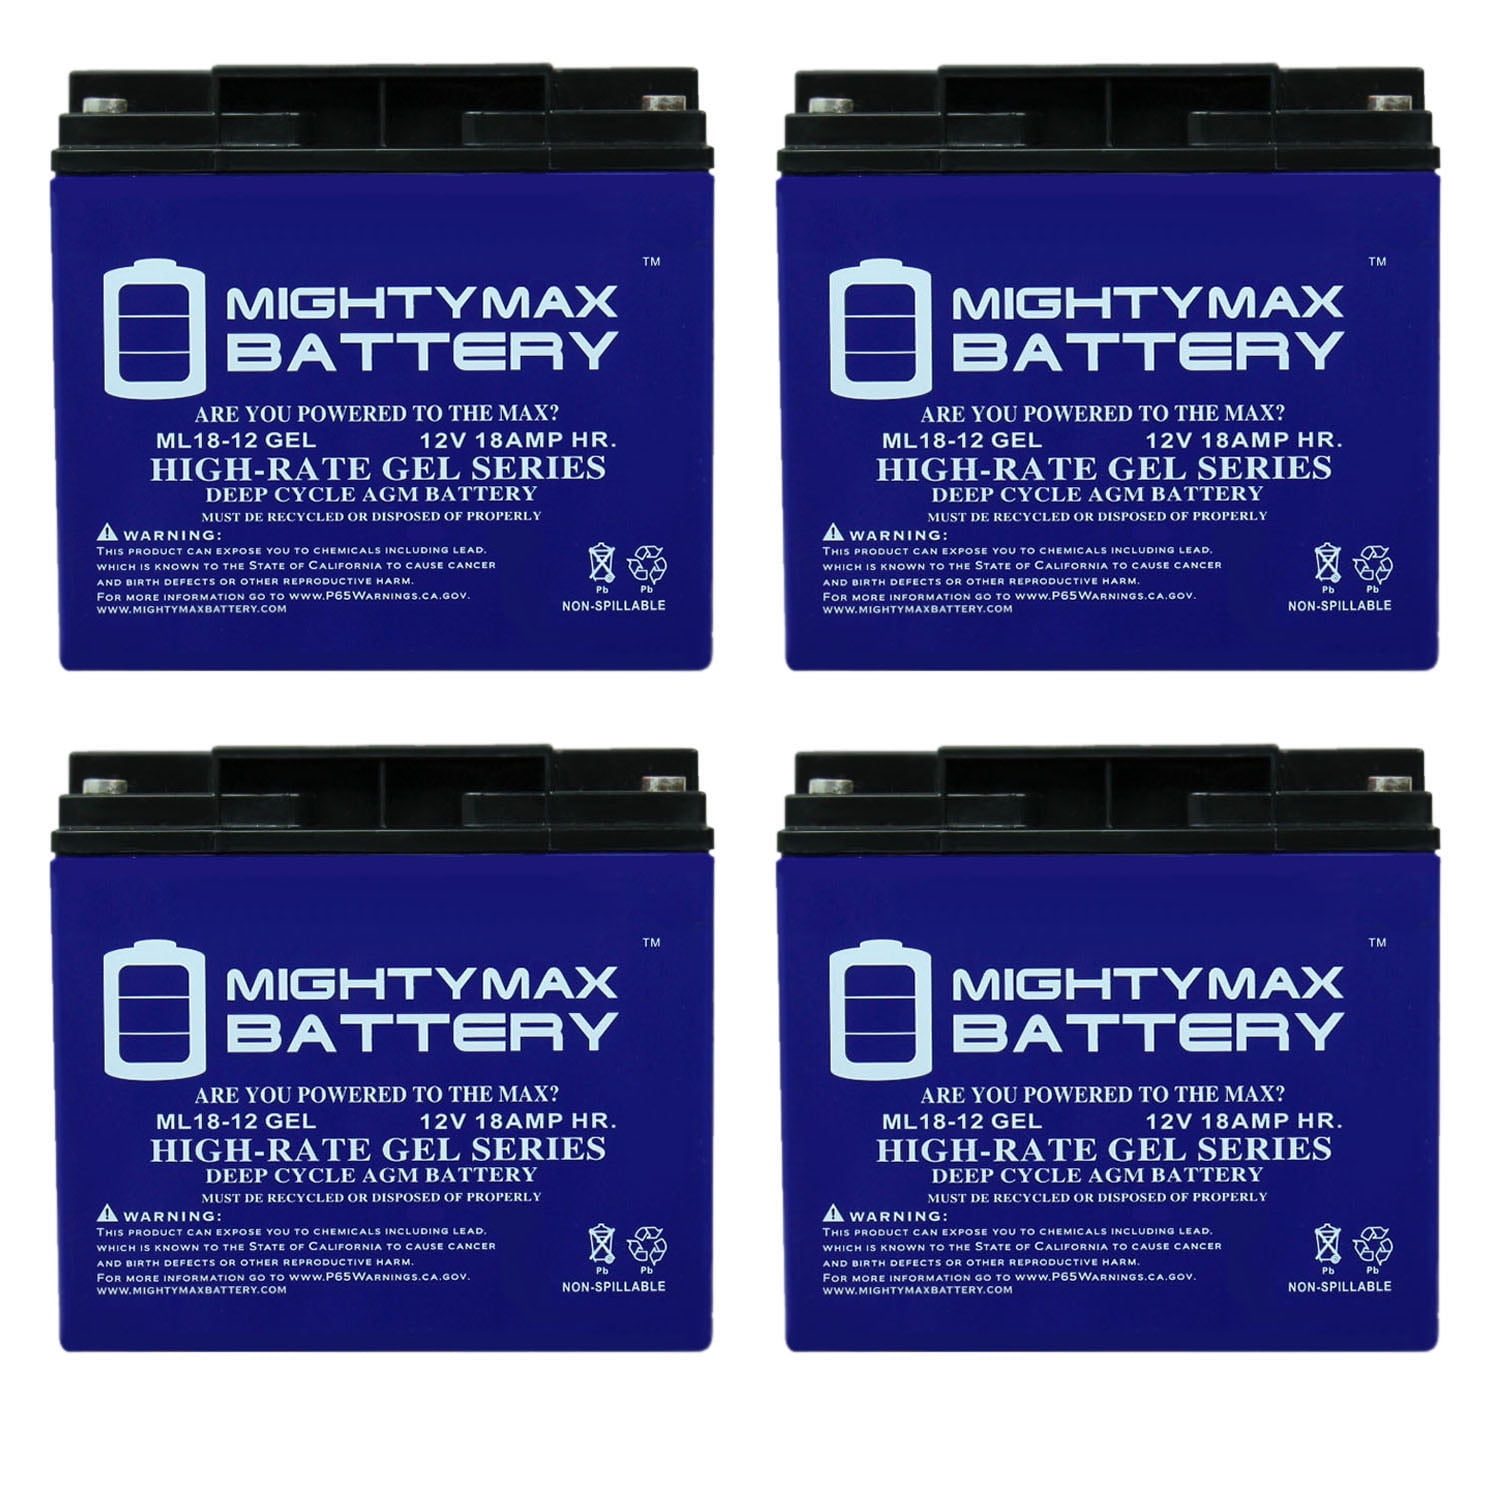 12V 18AH INT Battery Replacement for Ultratech IM-12180 Lawn Mower